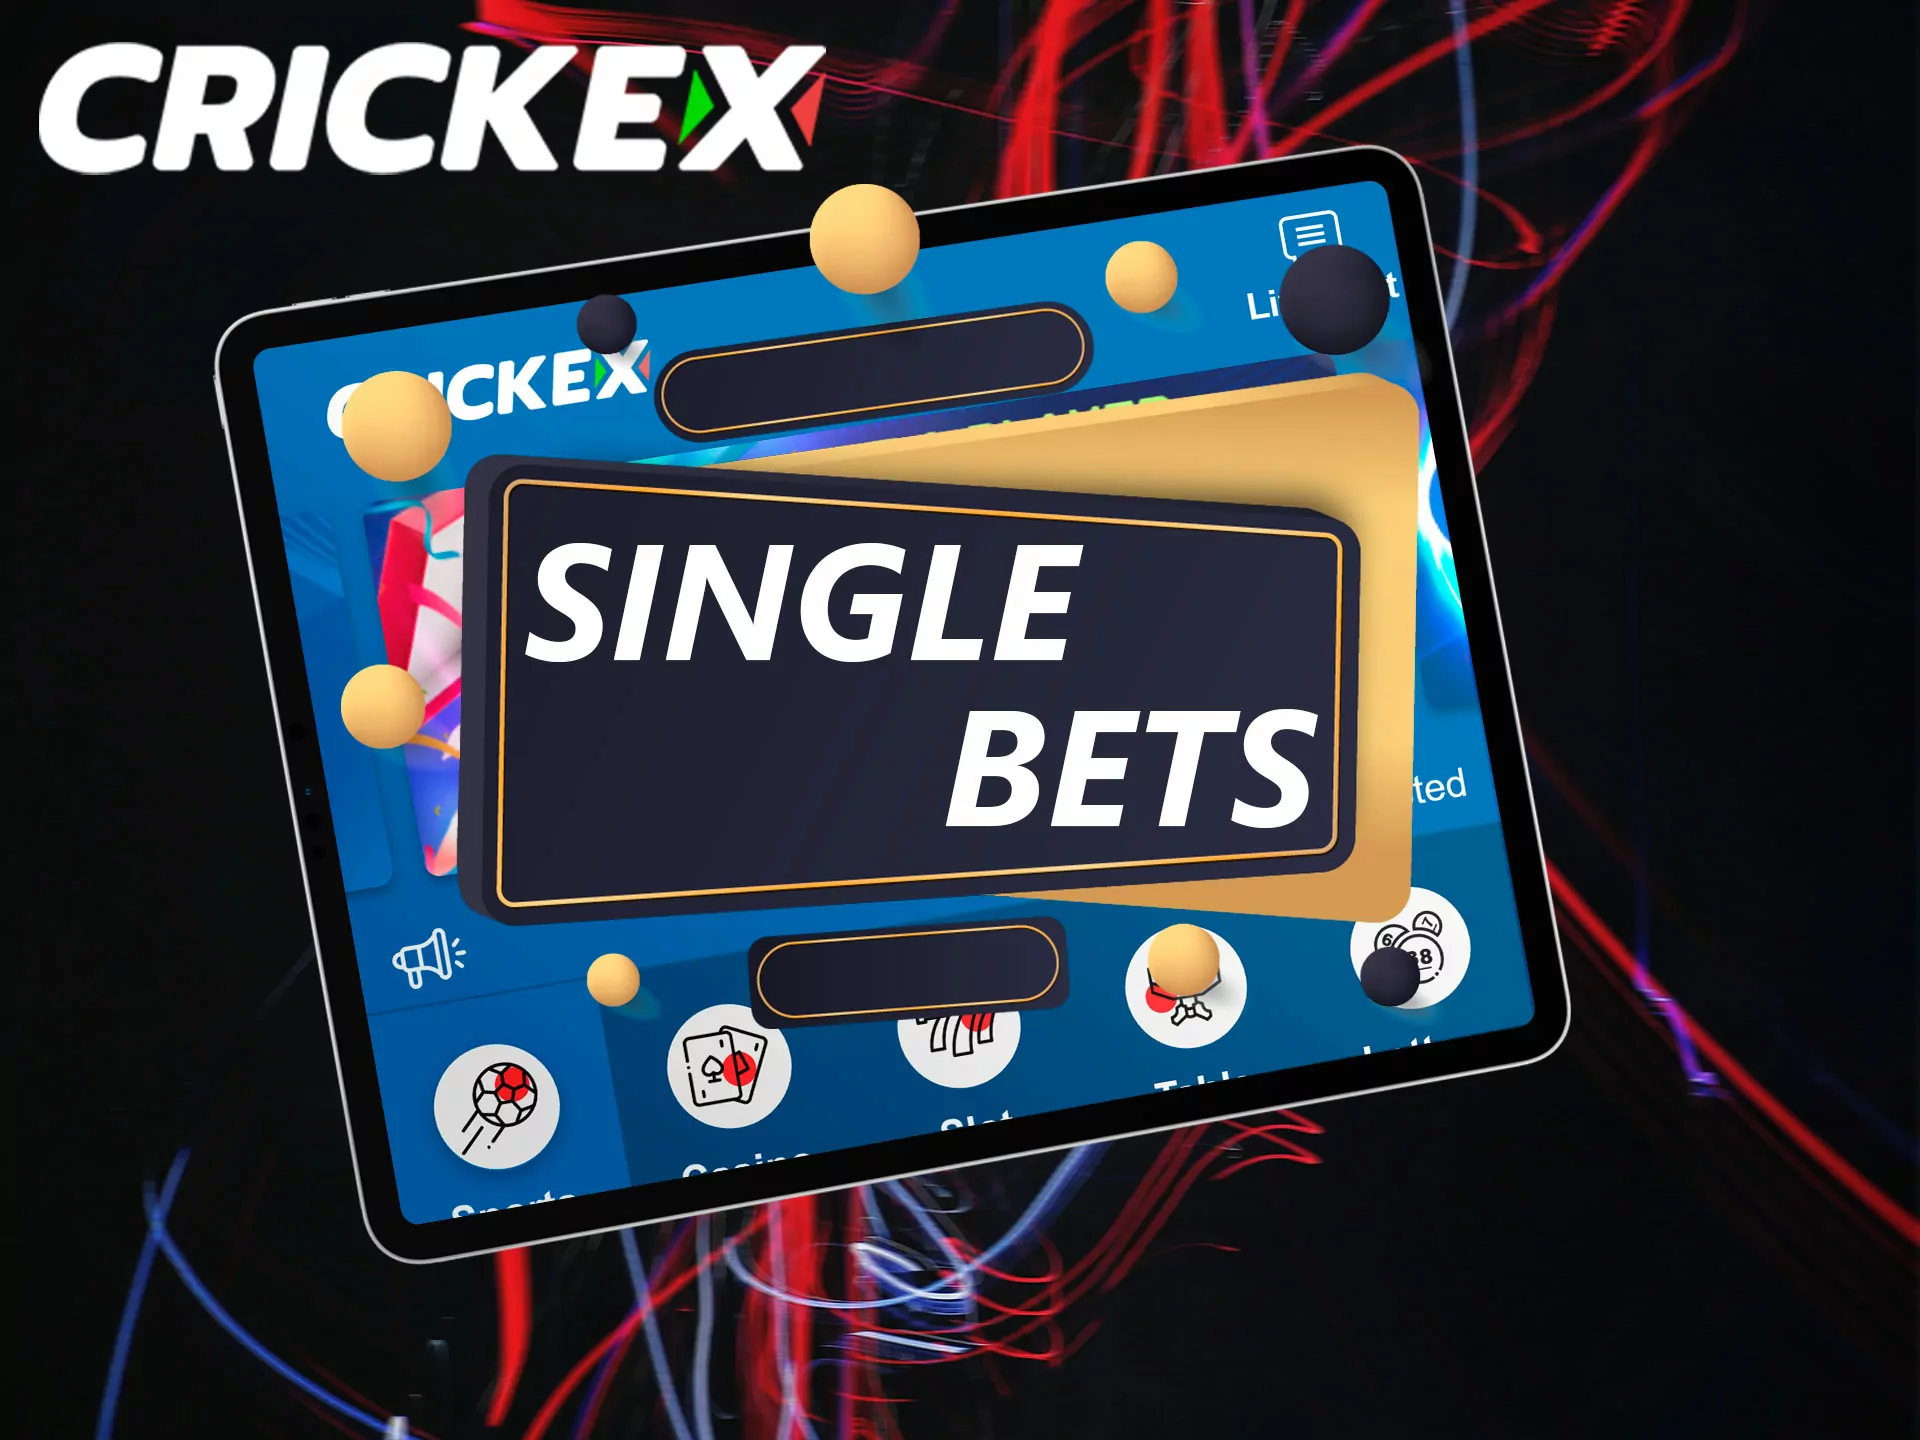 In this type of betting, the player can bet on one of the outcomes of one particular match.